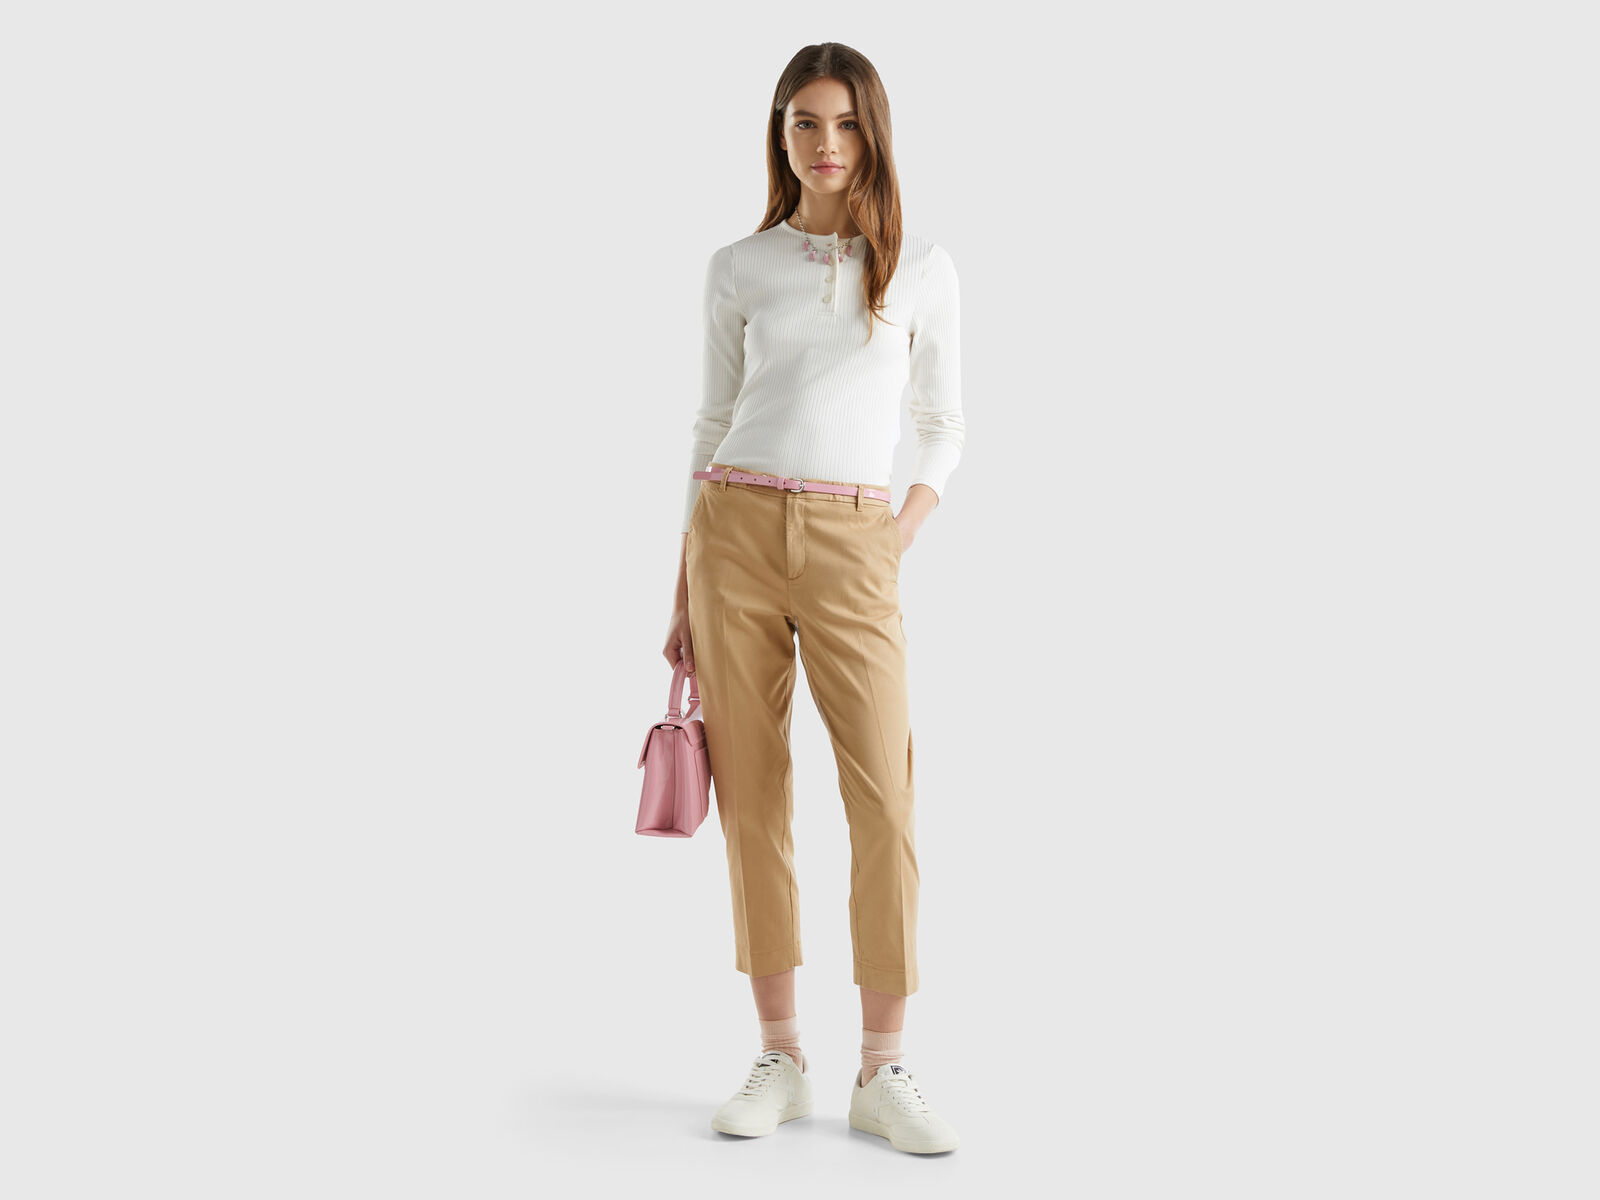 Beige Cotton Stretch Chinos, Ladies Country Clothing